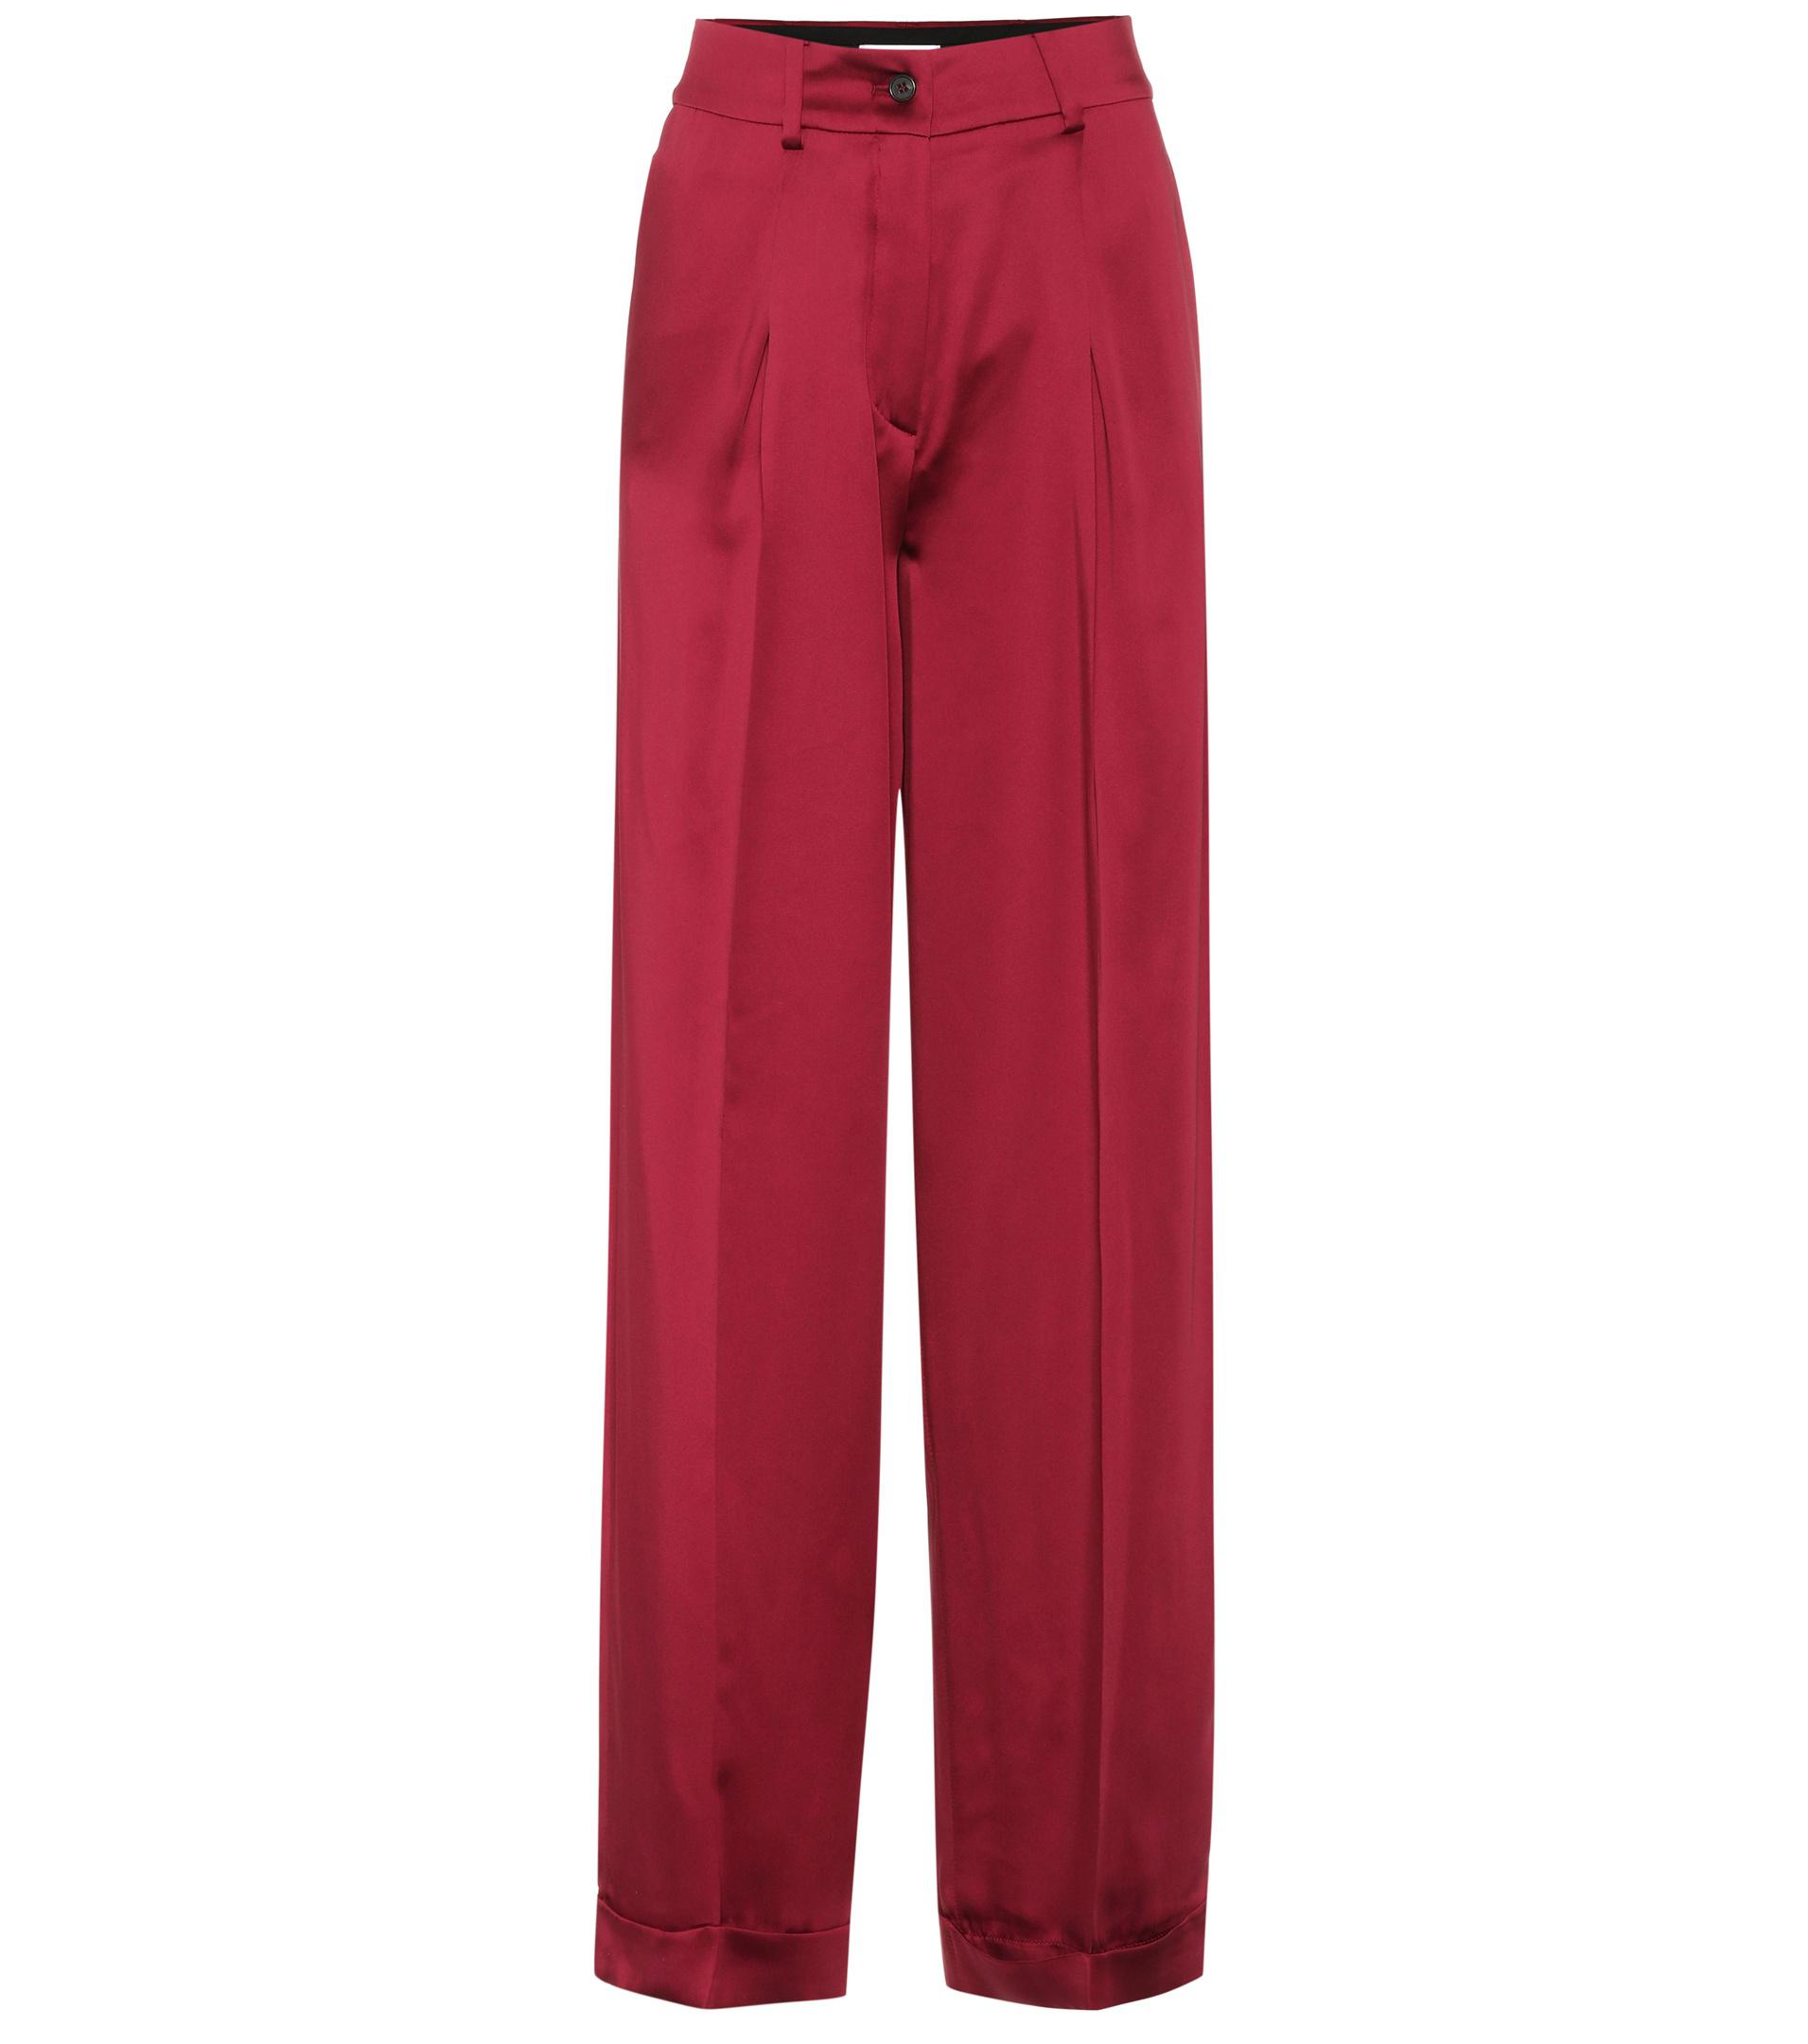 Lyst - Valentino Silk Satin Trousers in Red